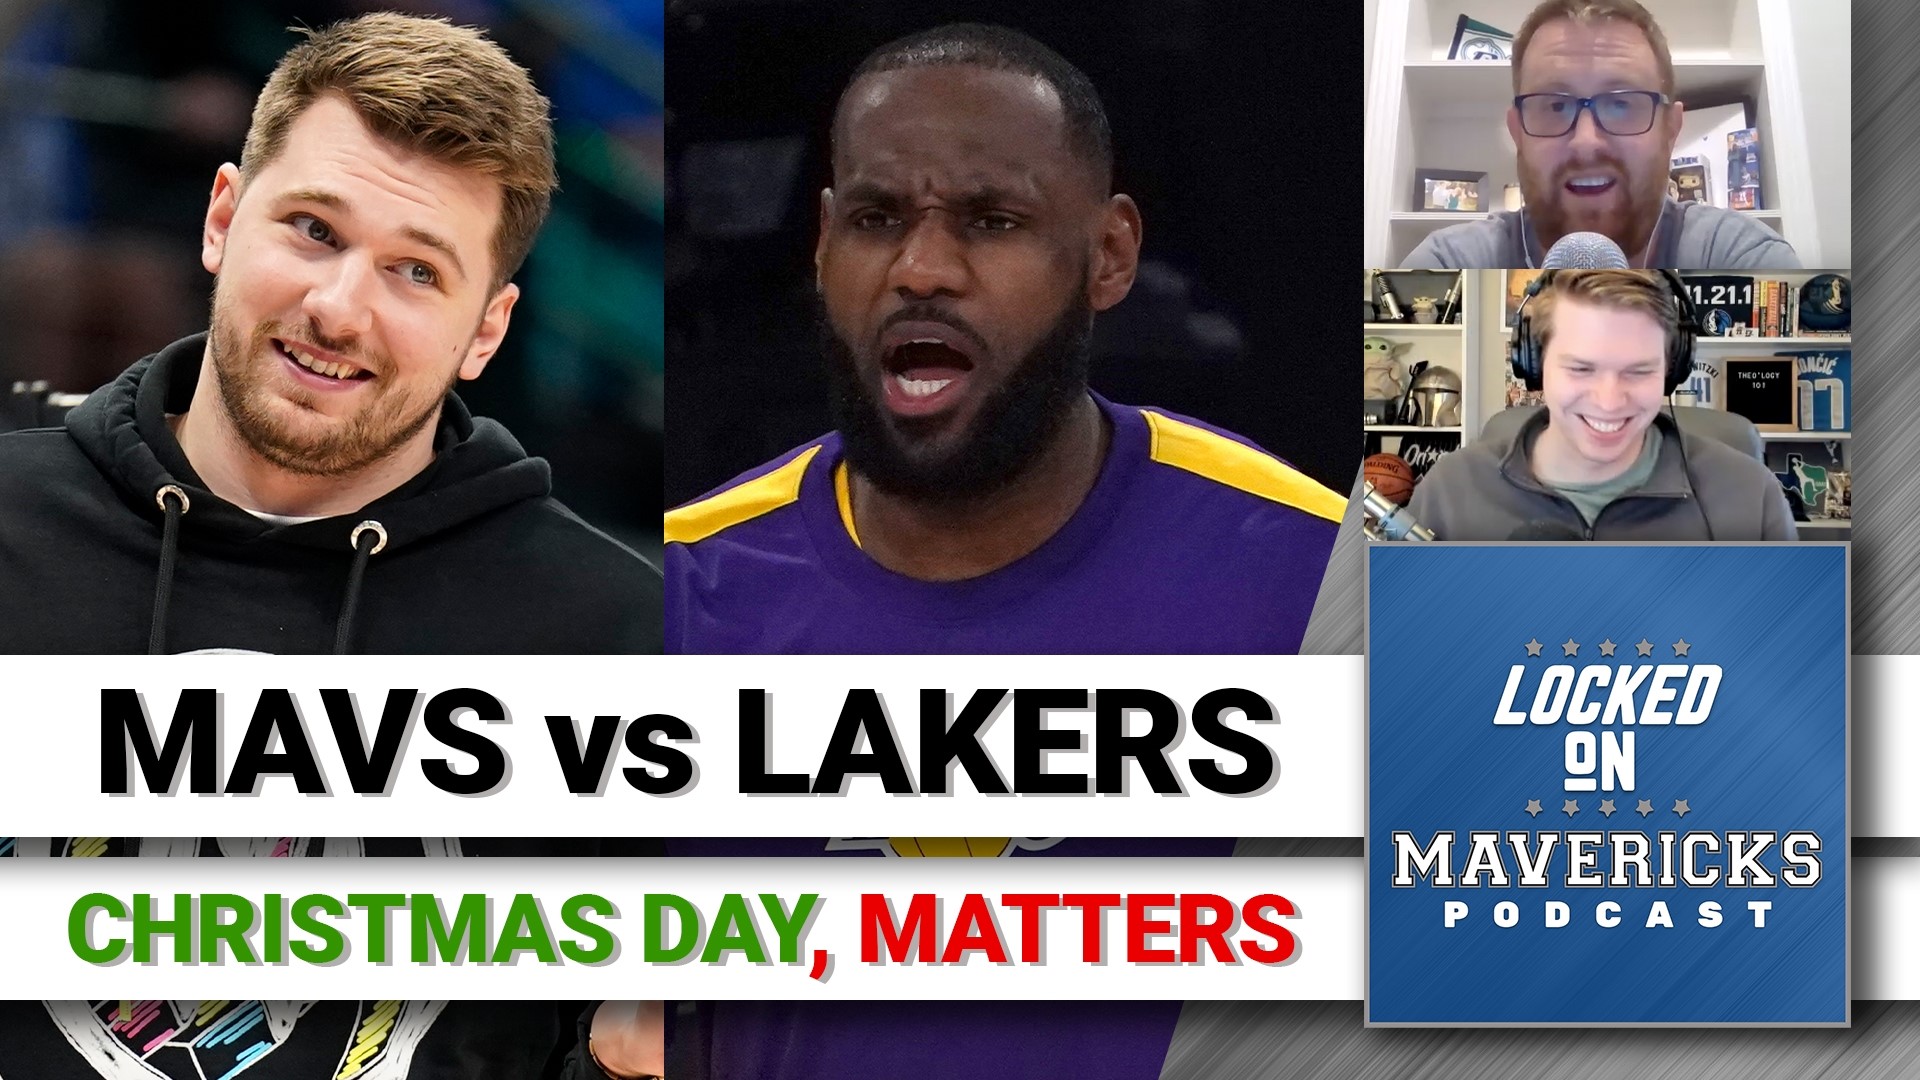 NBA Christmas Day schedule features familiar star power, per AP source